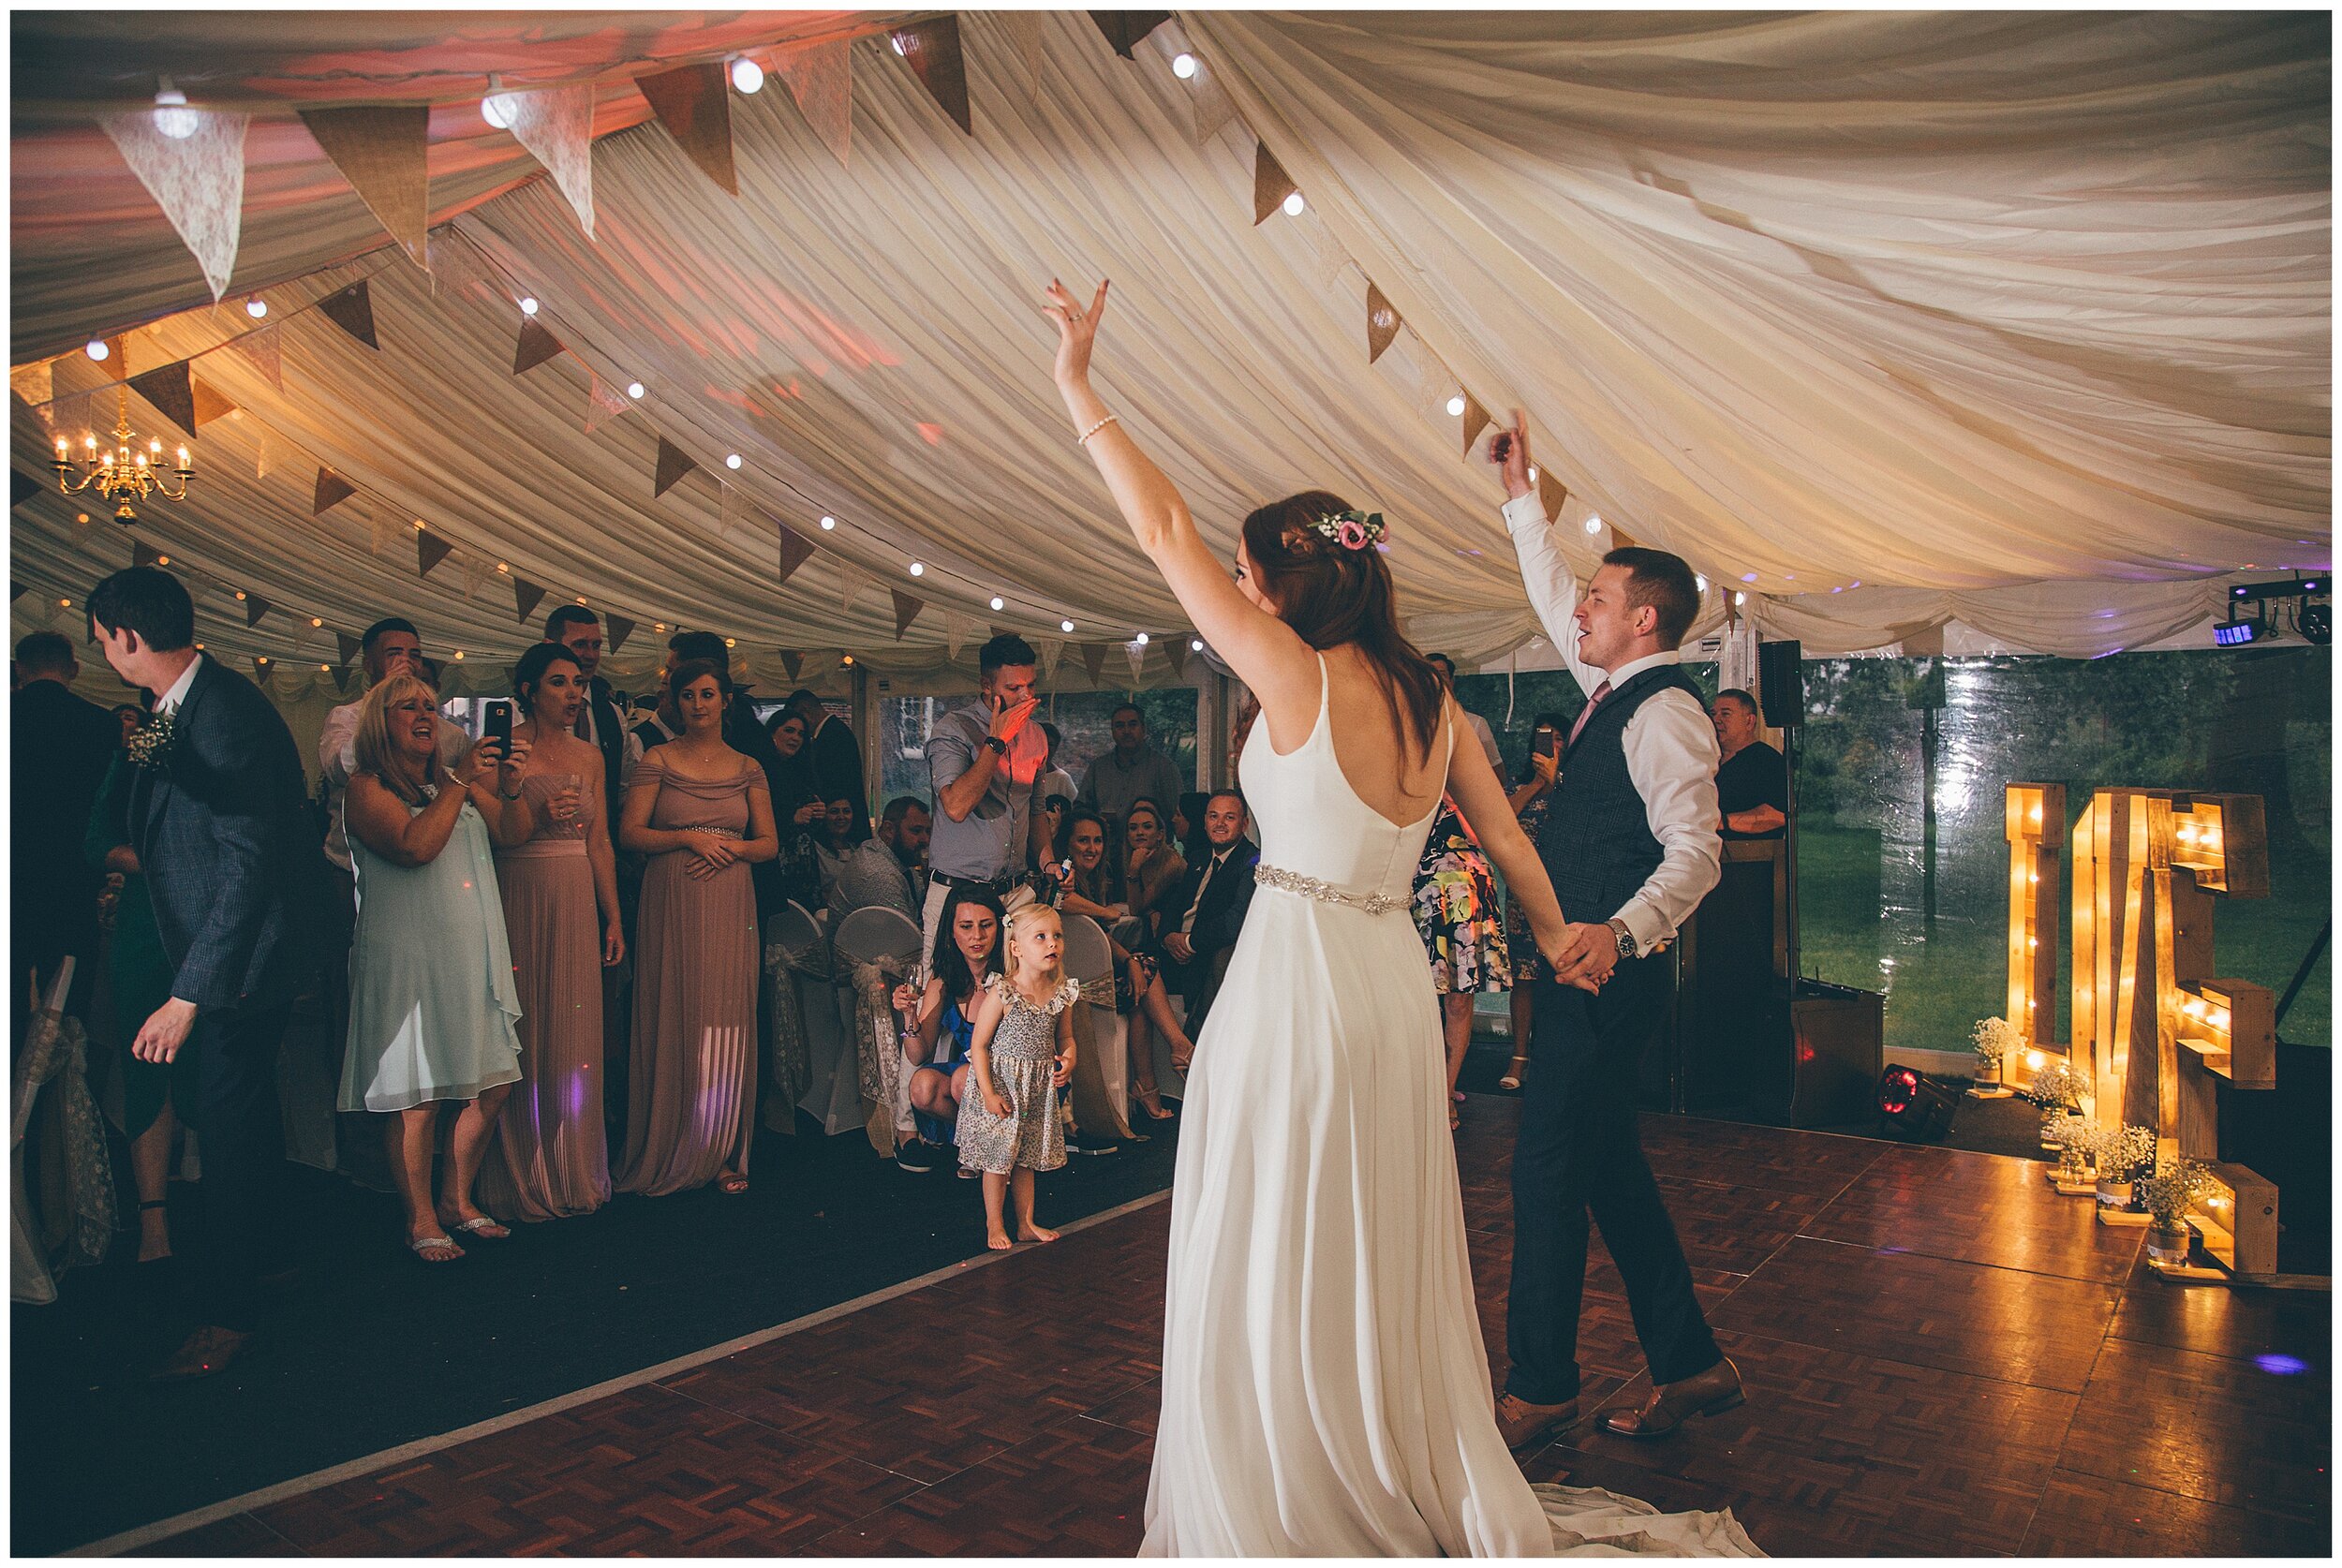 Weddings gusts cheer on bride and groom during their First Dance in marquee wedding in Chester.